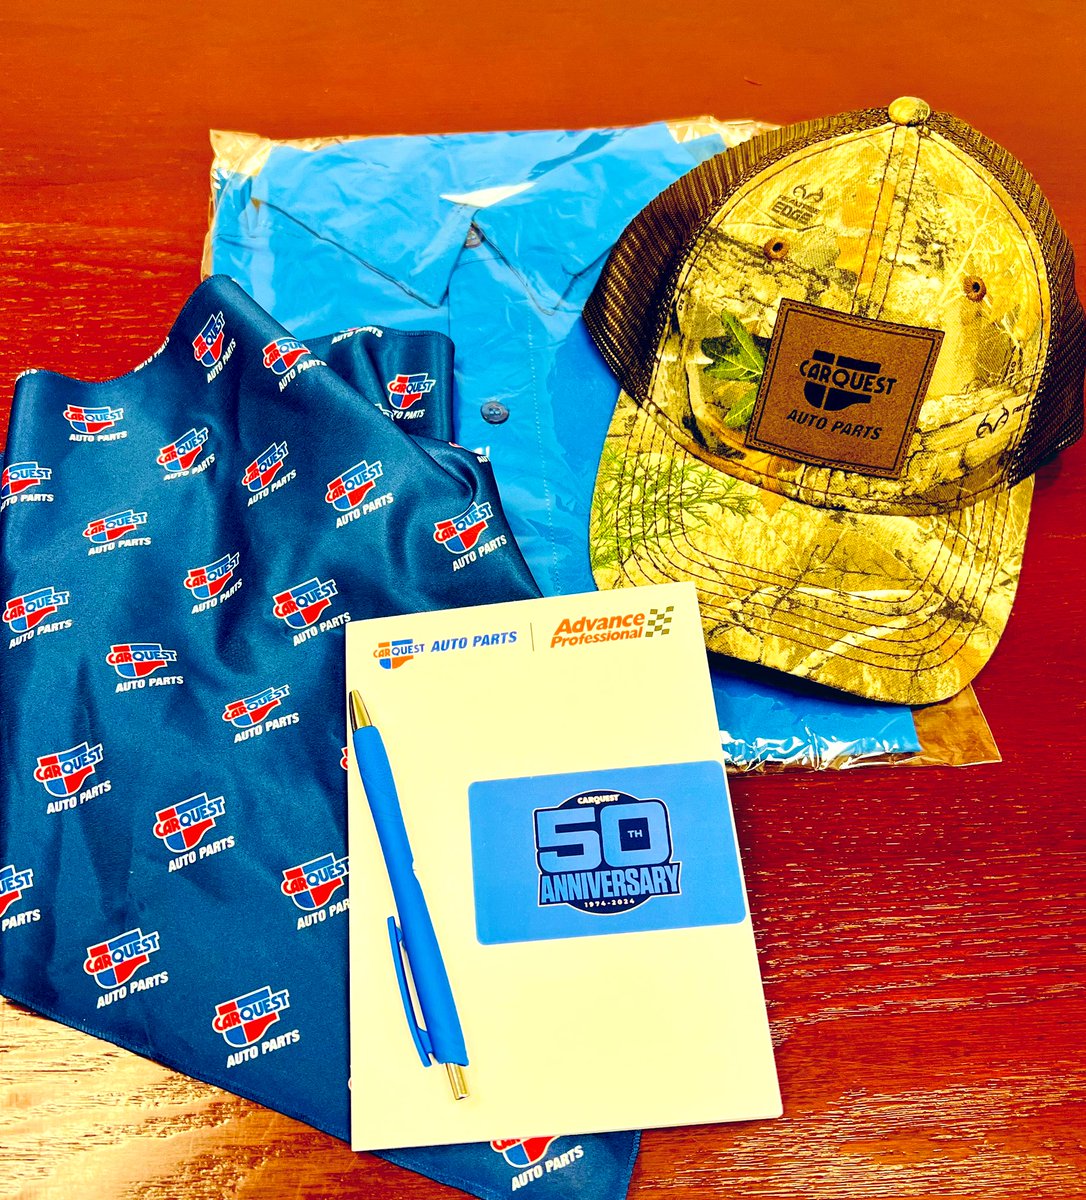 .@Carquest celebrates 50 YEARS! We’re giving away this #Carquest gear + a $50 gift card! To enter ⬇️ 1. Hit the ❤️ 2. Retweet 3. Must follow @Carquest @DonnySchatz @TonyStewart & @TonyStewart_Rcg Winner announced Monday, 4/8 at 3 pm ET!